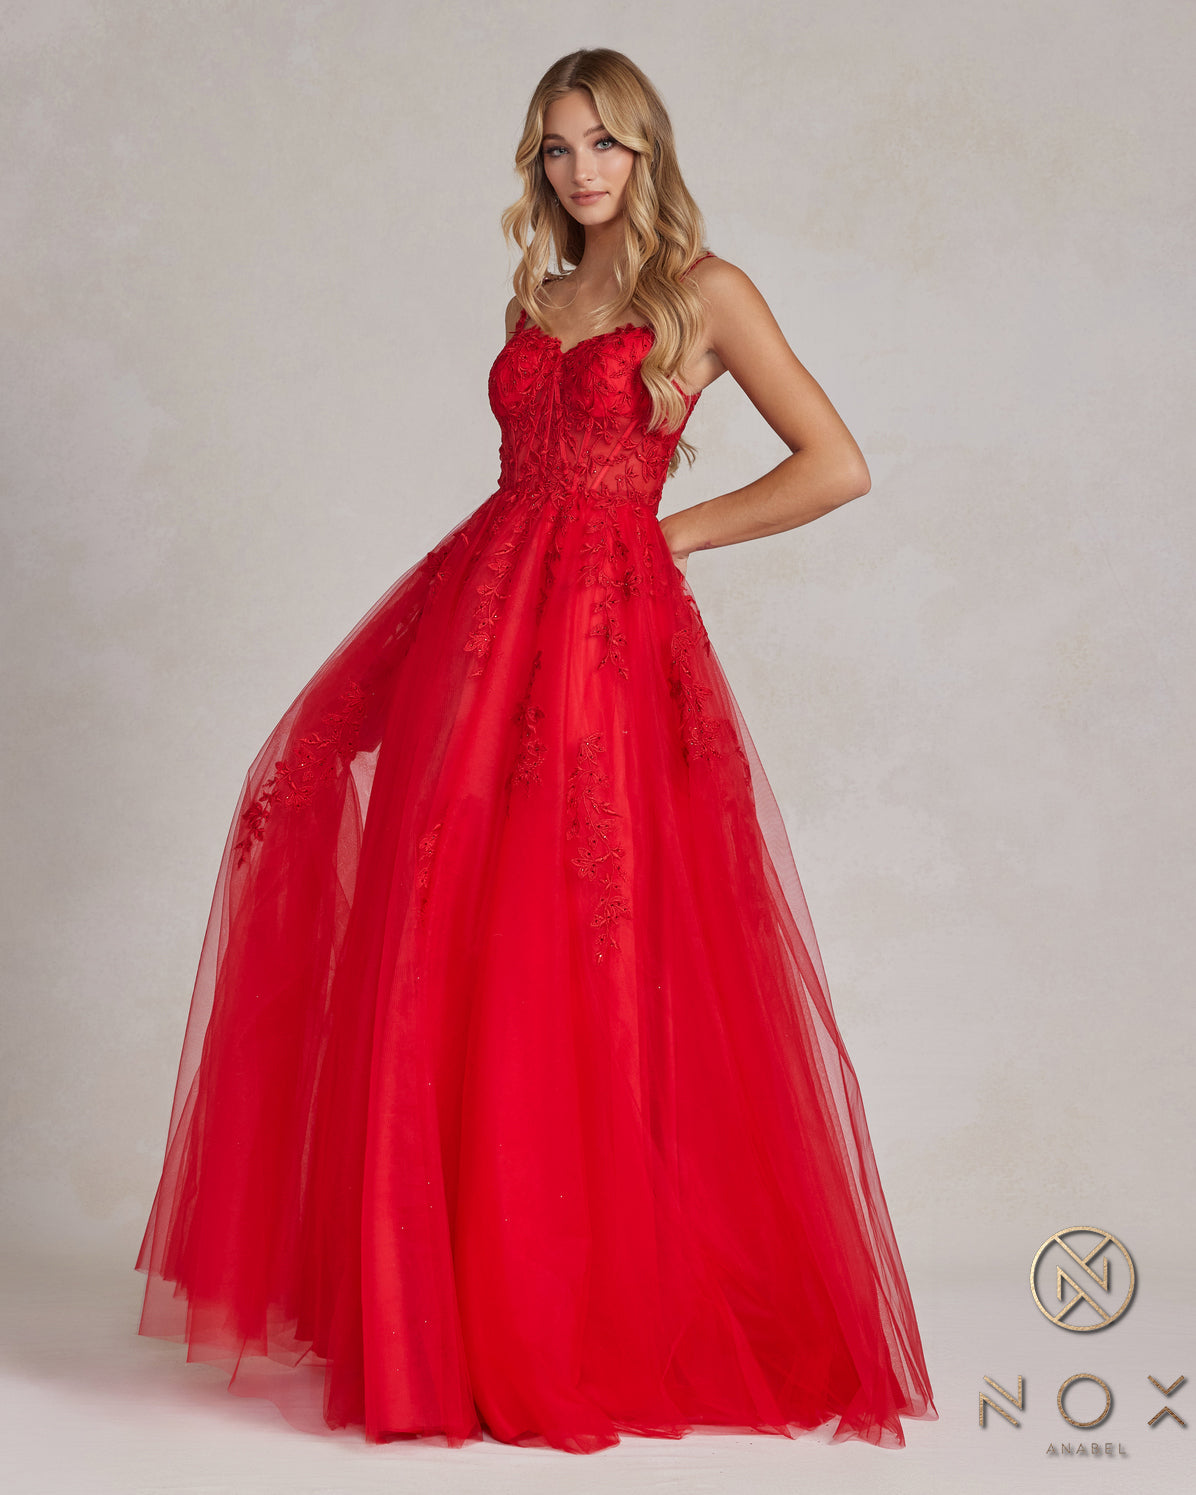 Nox Anabel T1082 Long Sexy A Line Prom Ball Gown Red